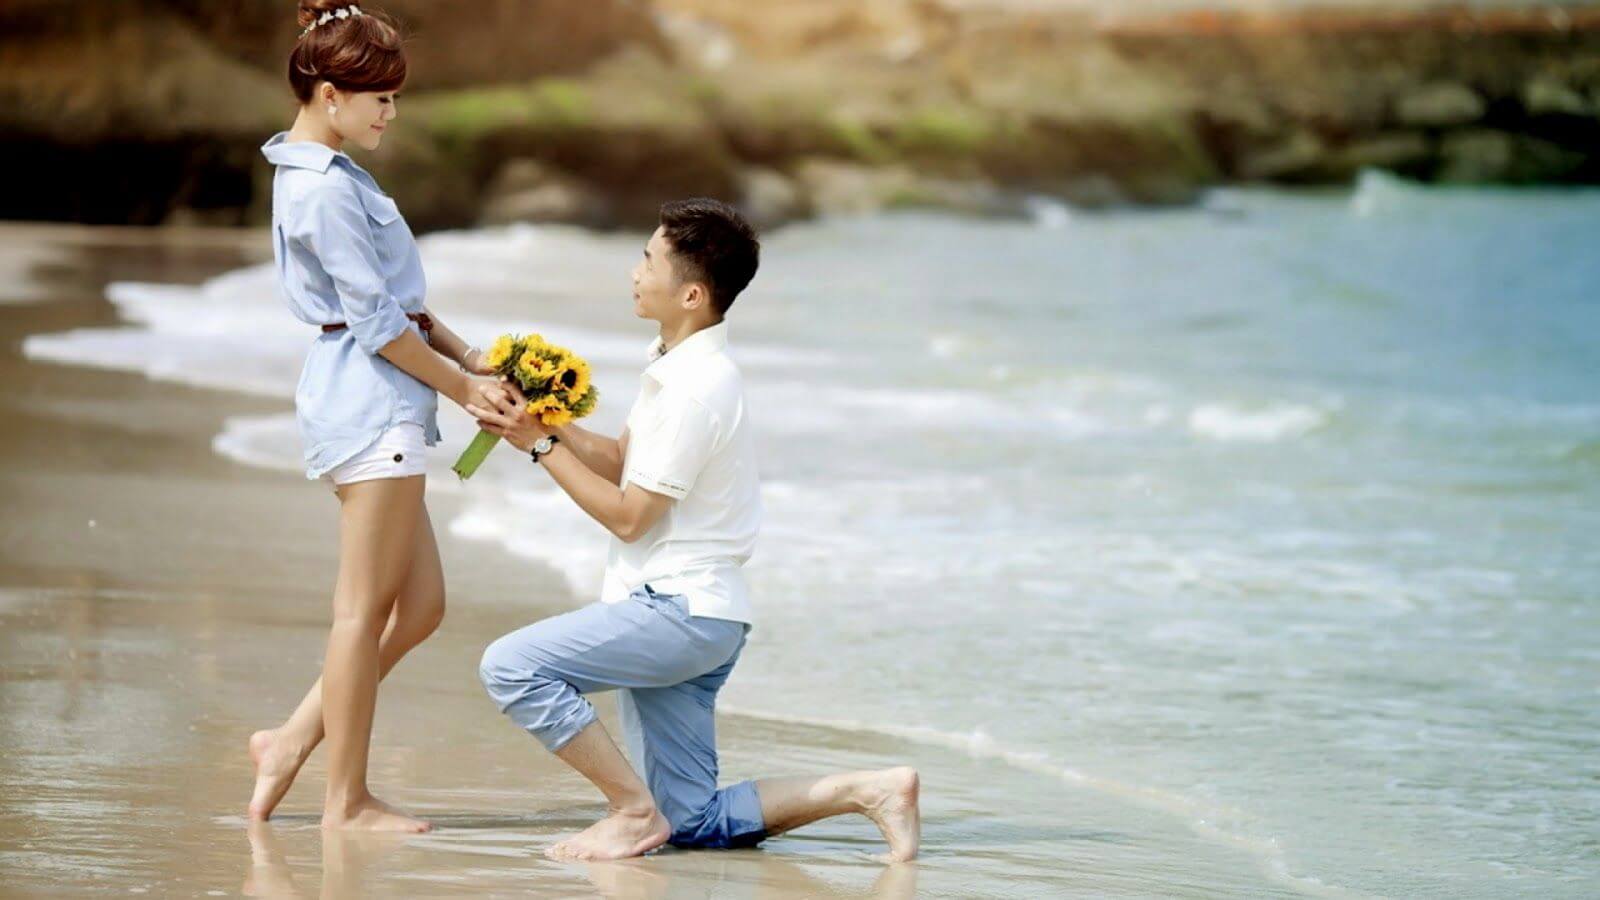 Cute Propose Day Images - Boy Proposes To Girl , HD Wallpaper & Backgrounds